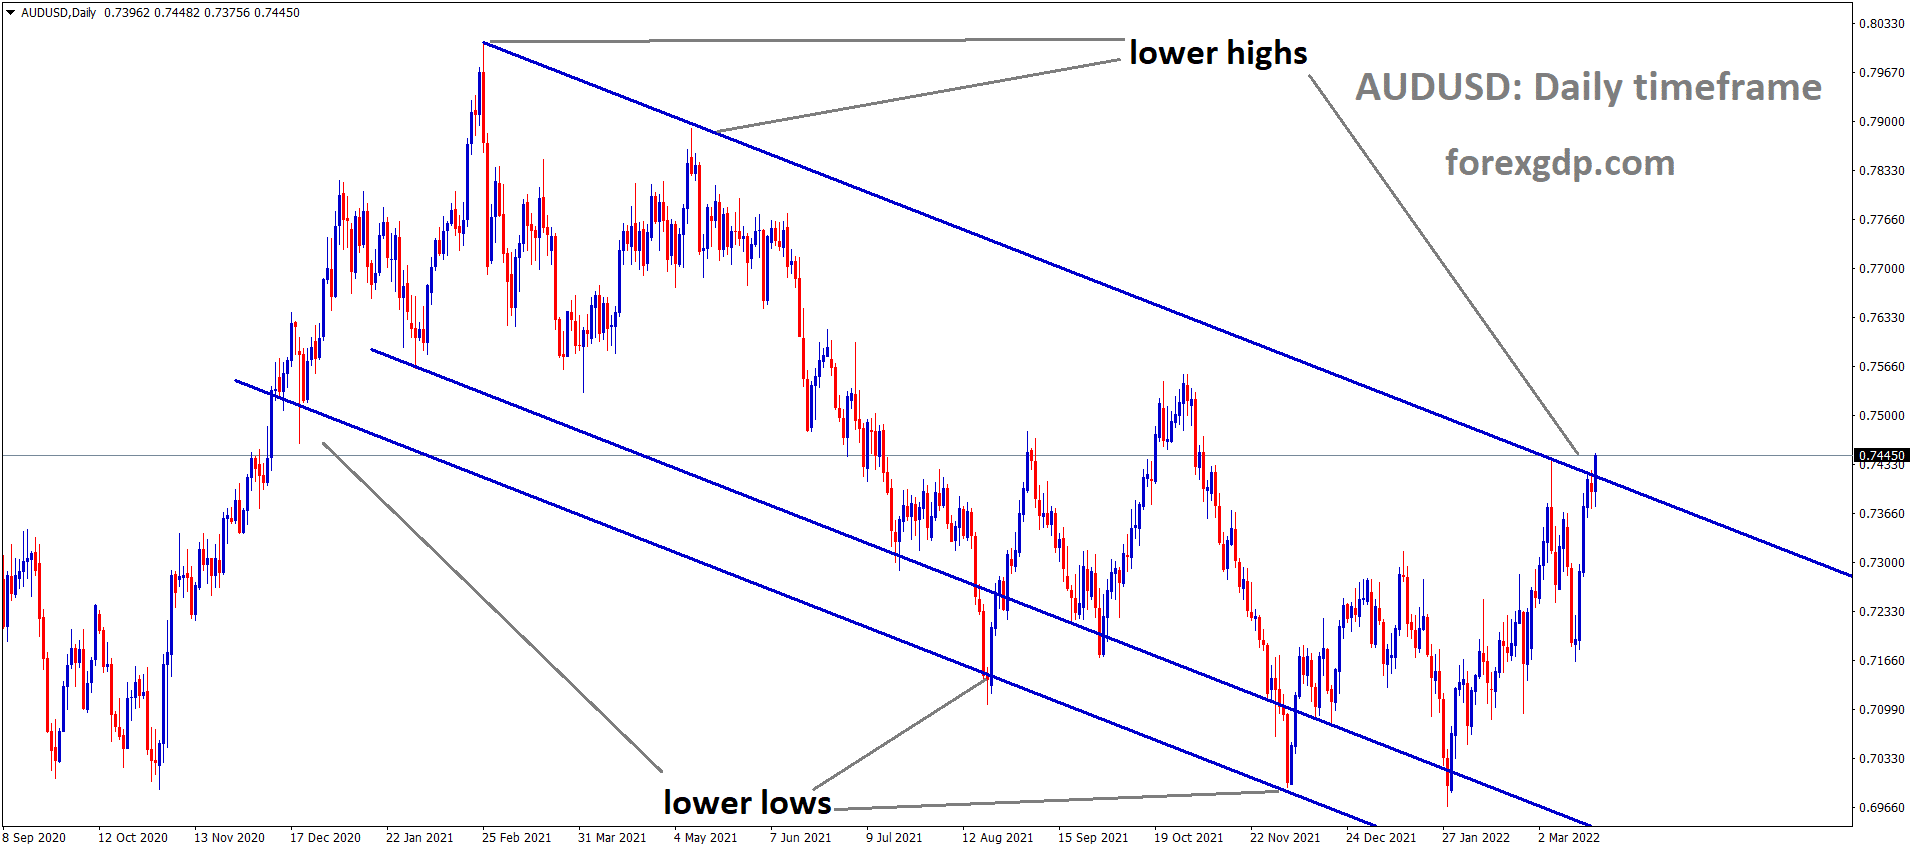 AUDUSDDaily Market has reached the lower high area of the Descending channel